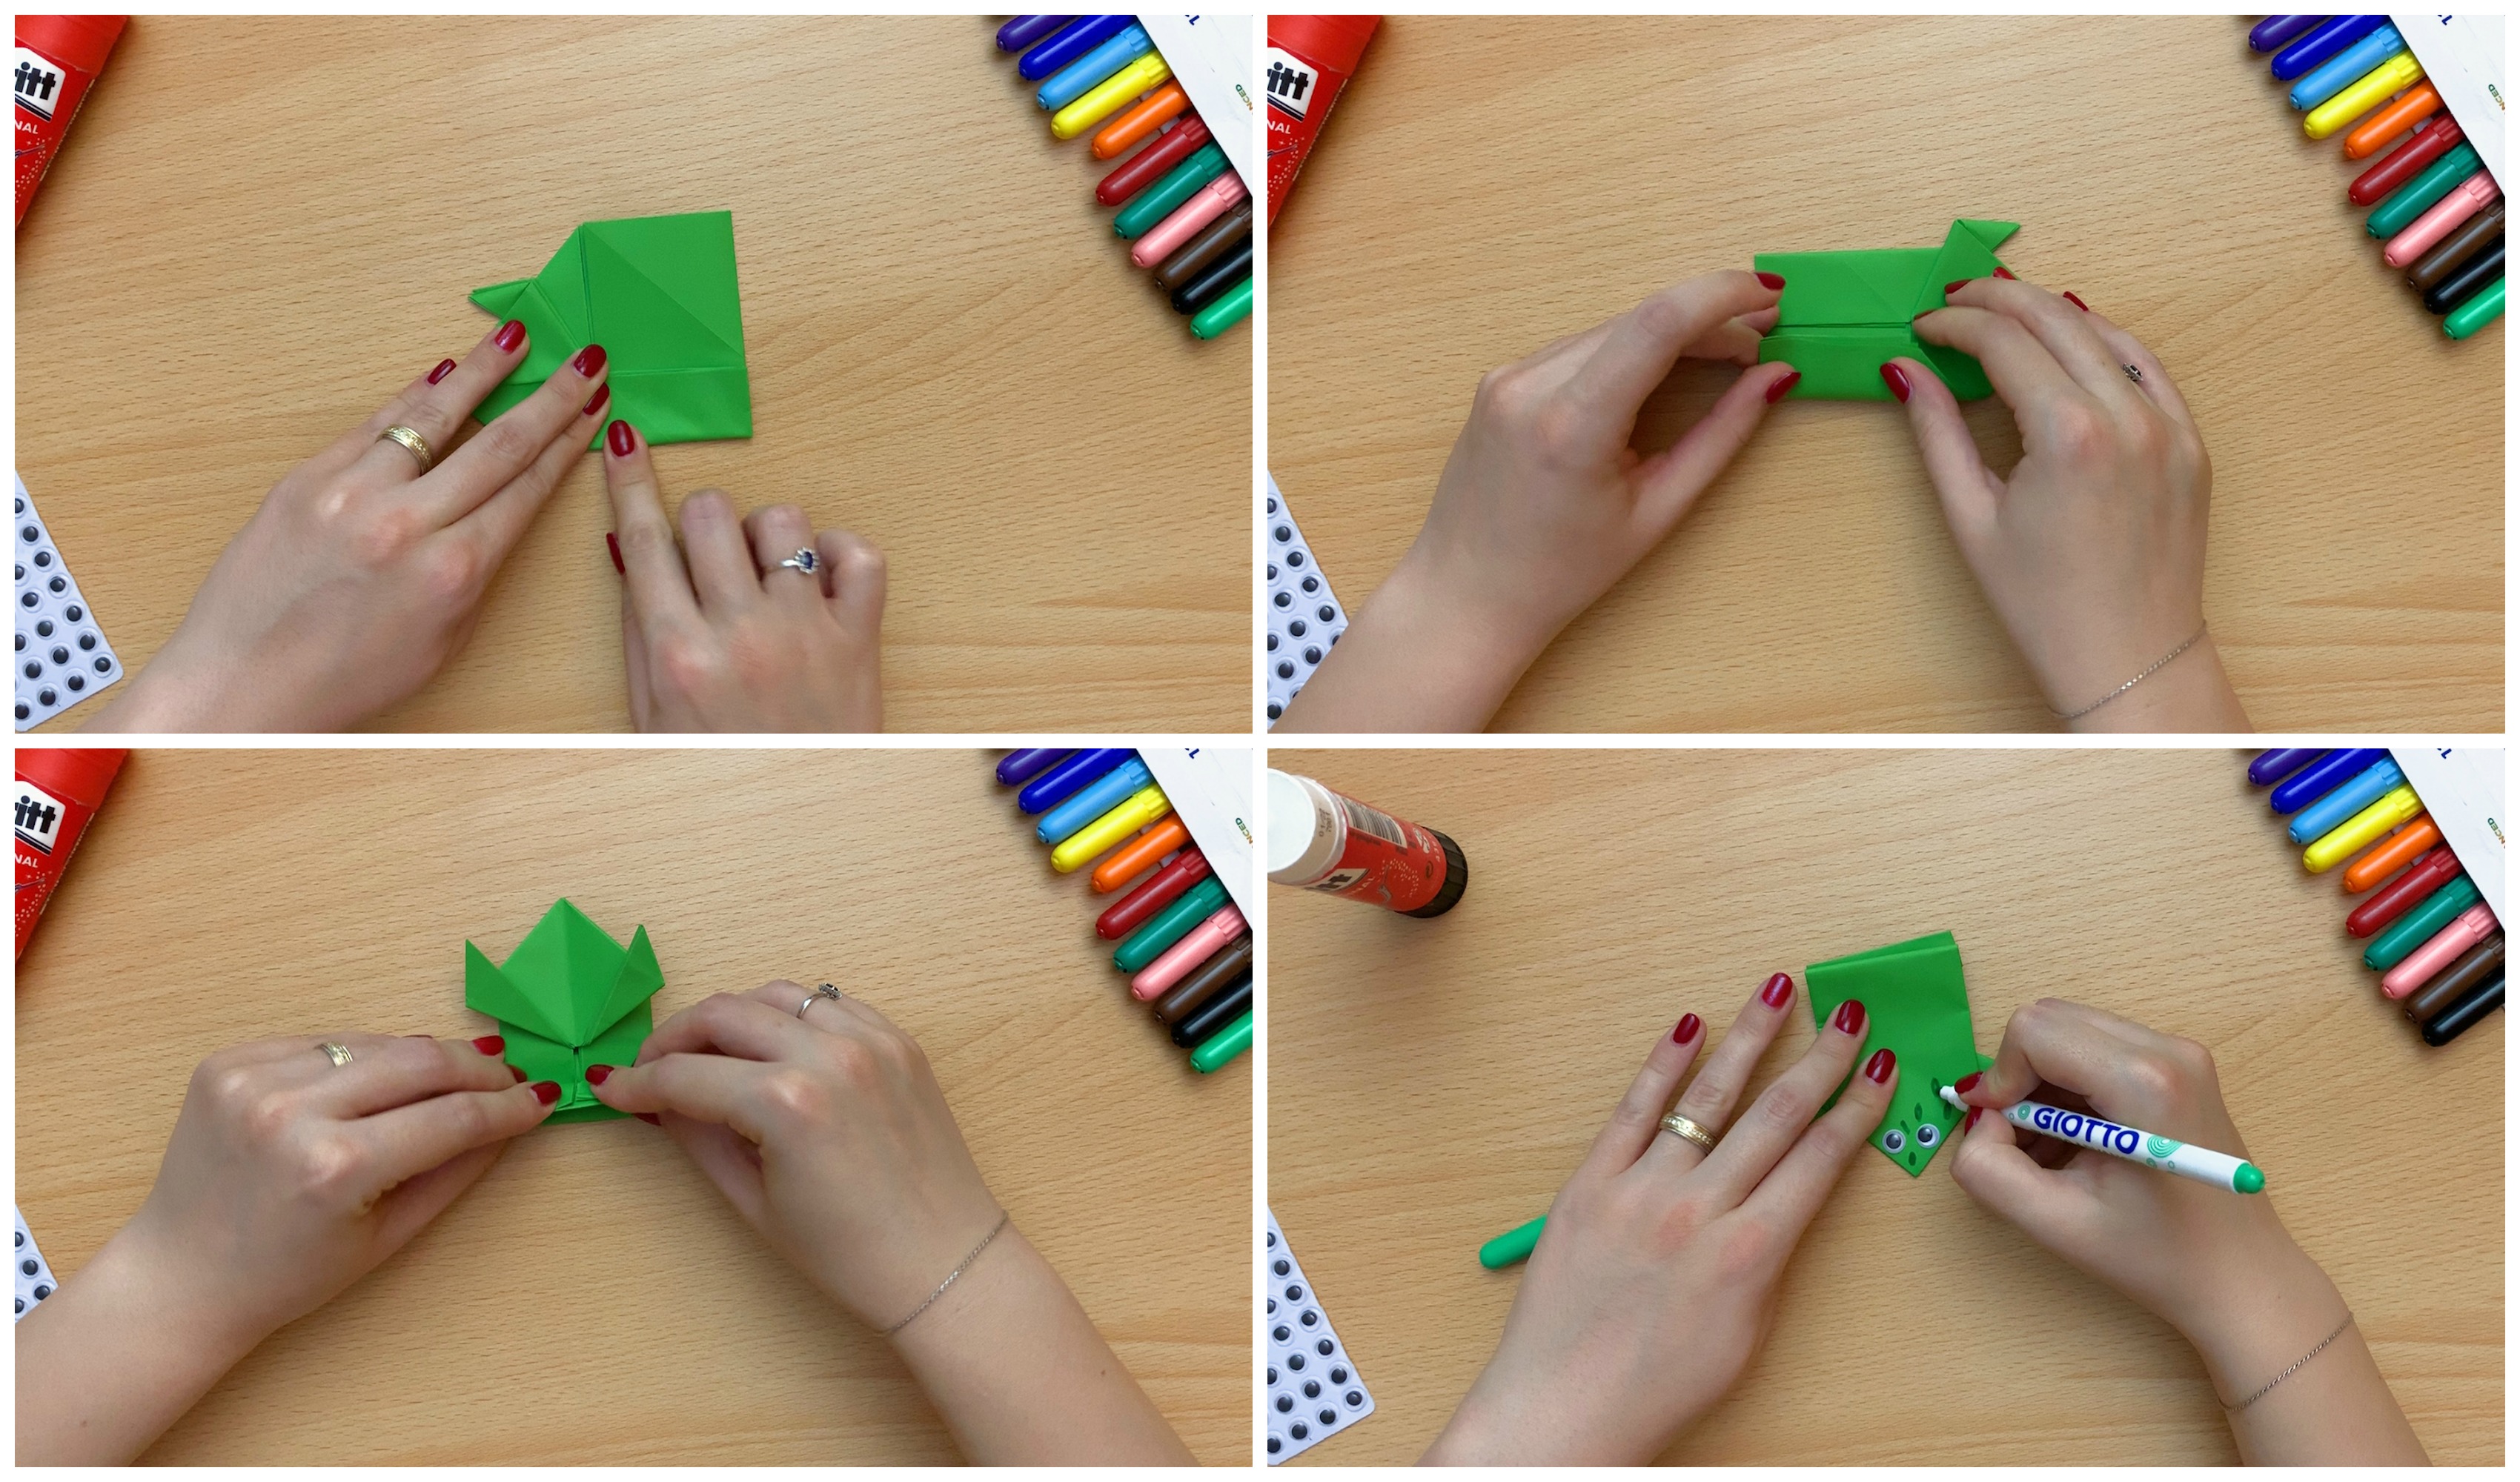 Leap Frog Paper Craft